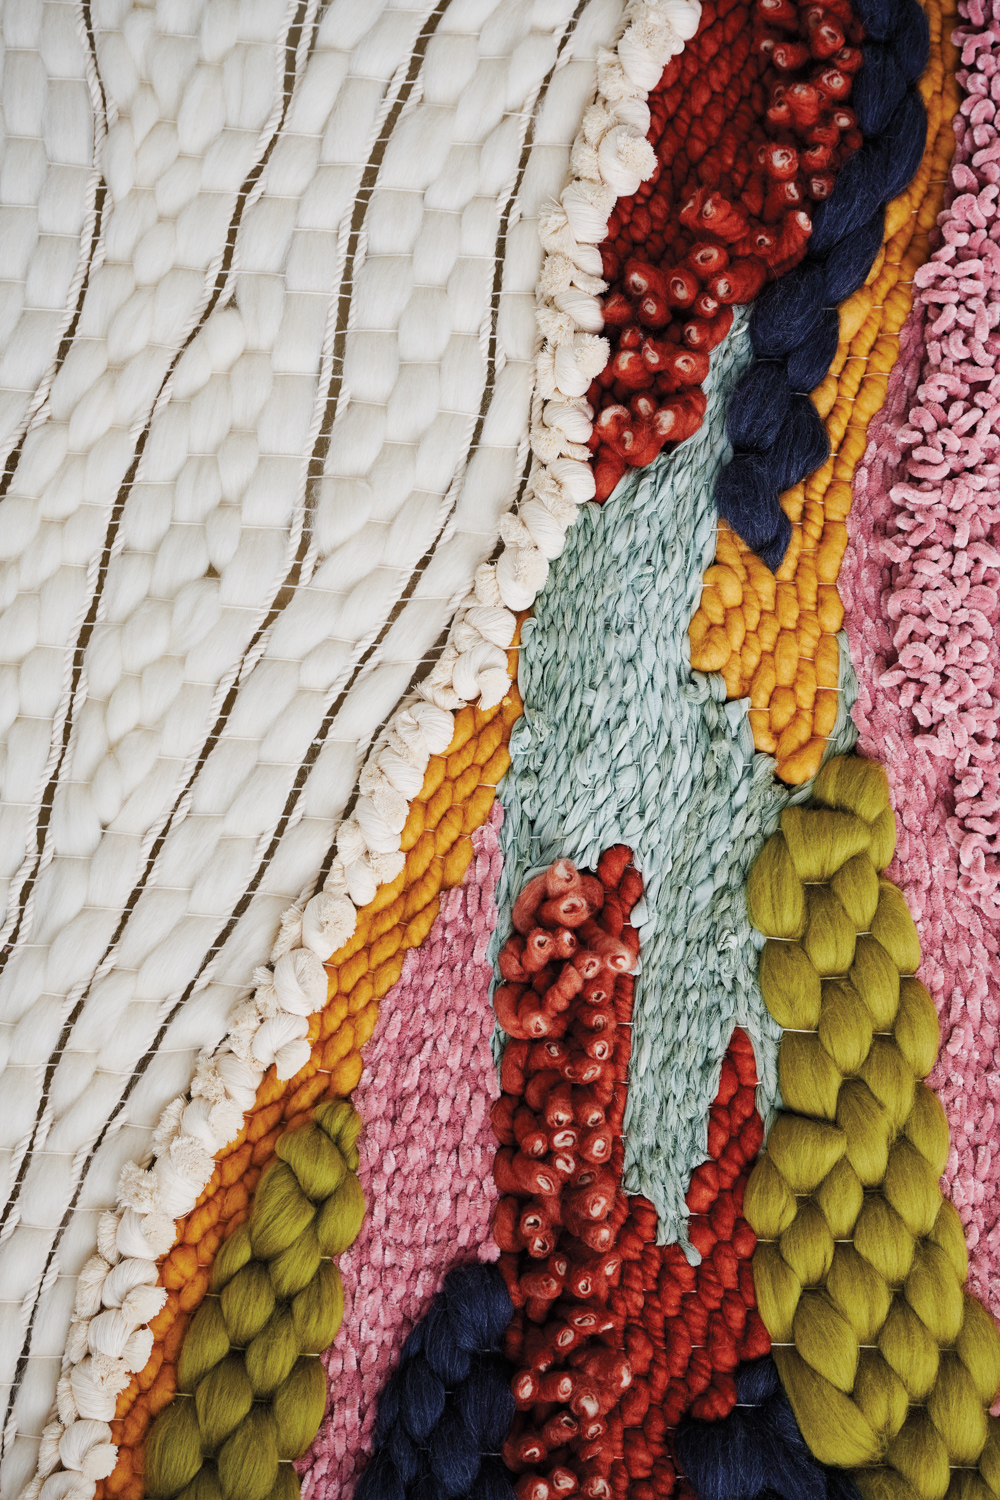 Shaylee Southerland’s woven work featuring fibers in various colors and textures